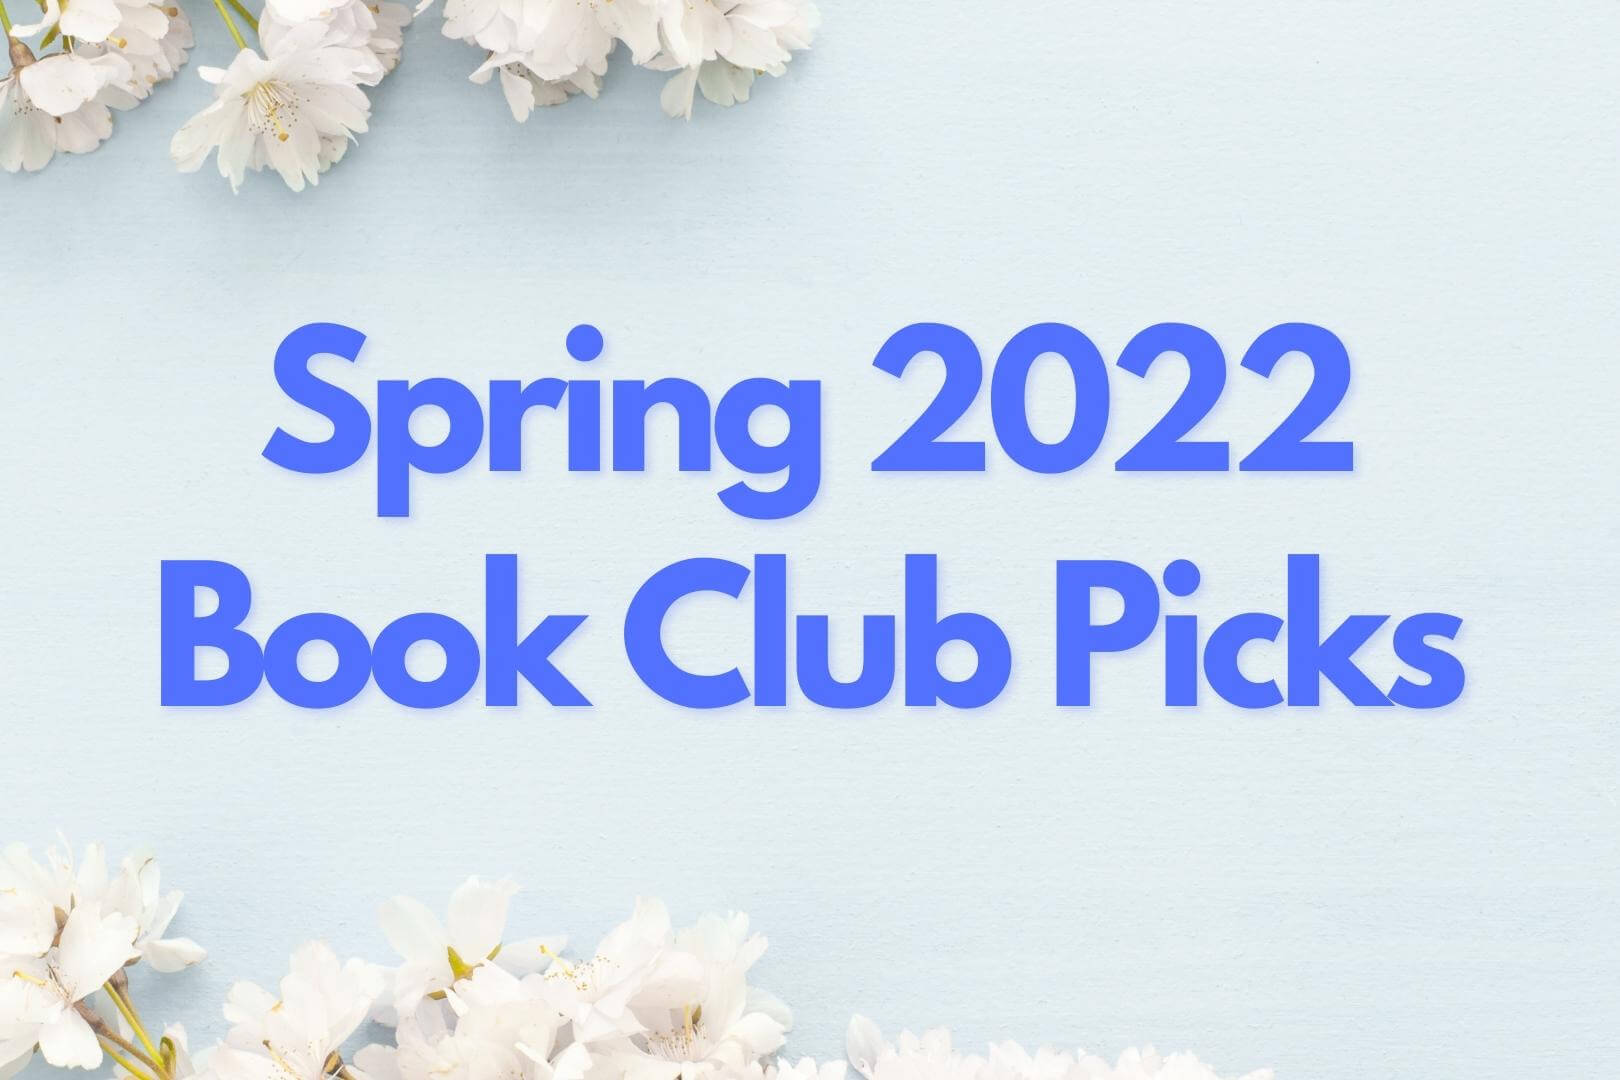 10 Book Club Books for Spring 2022